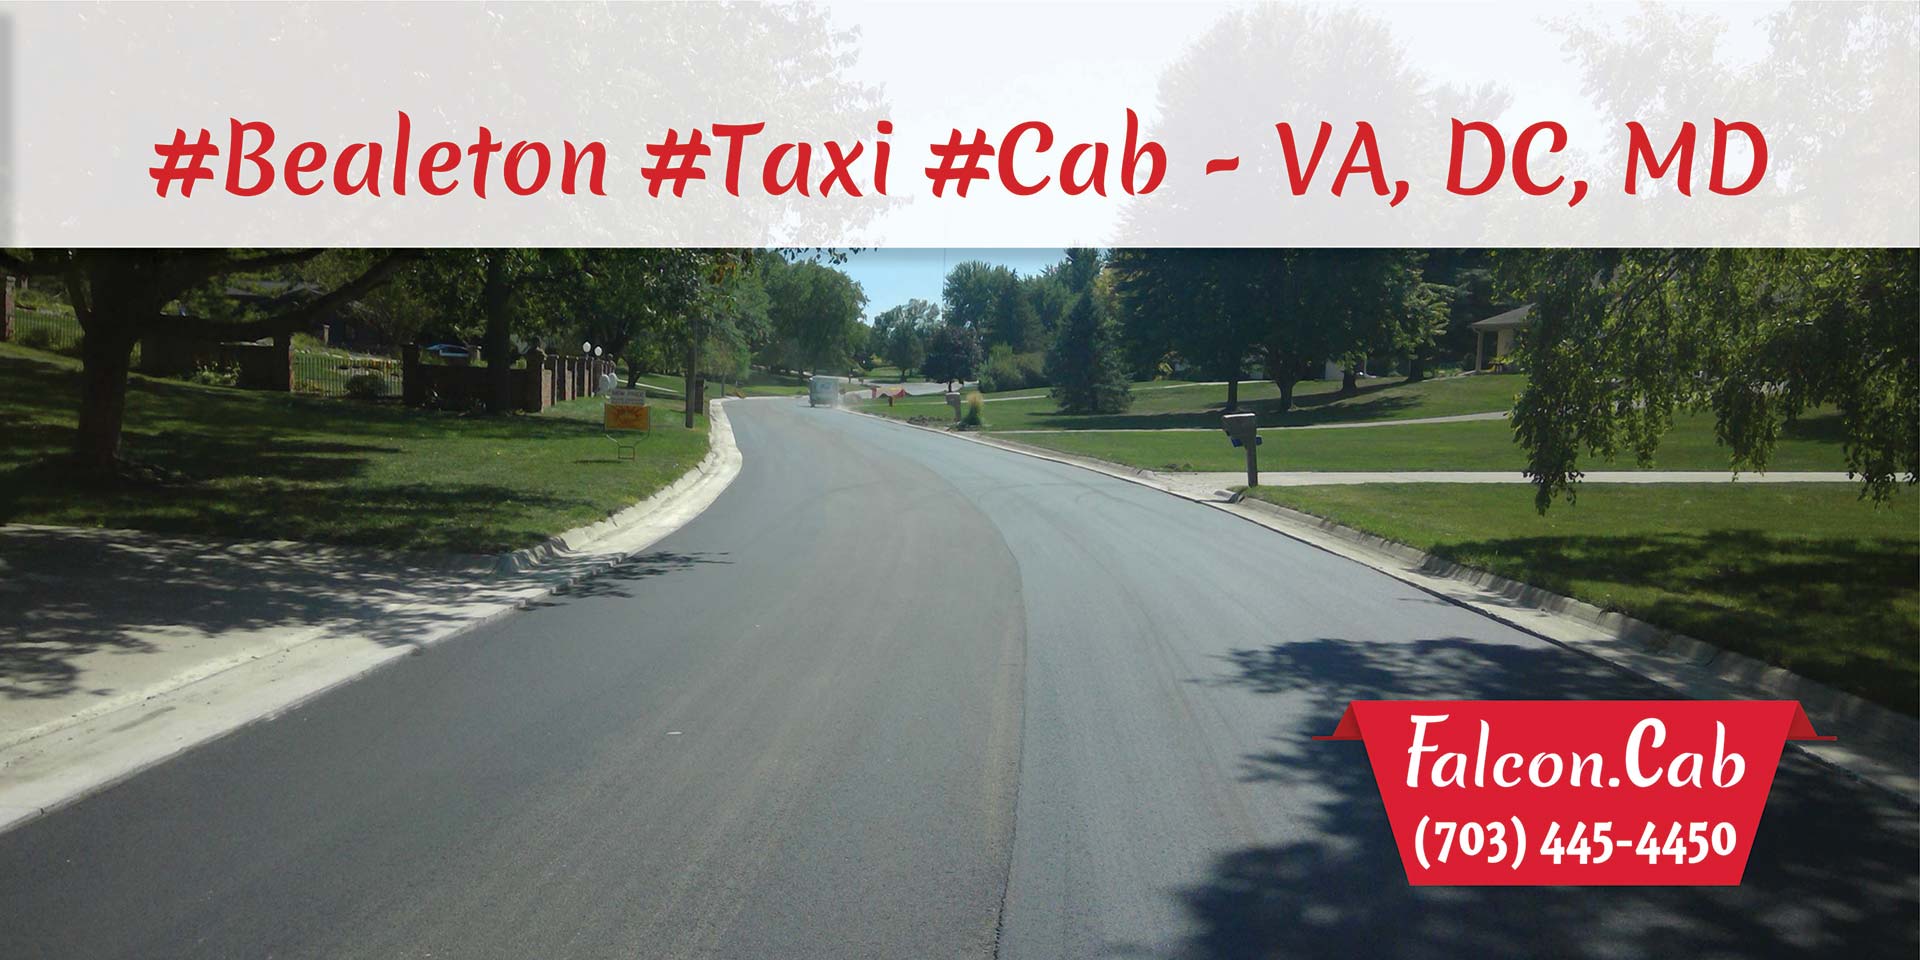 Bealeton Taxi Cab Serving in Virginia, DC, MD | Call (703) 445-4450